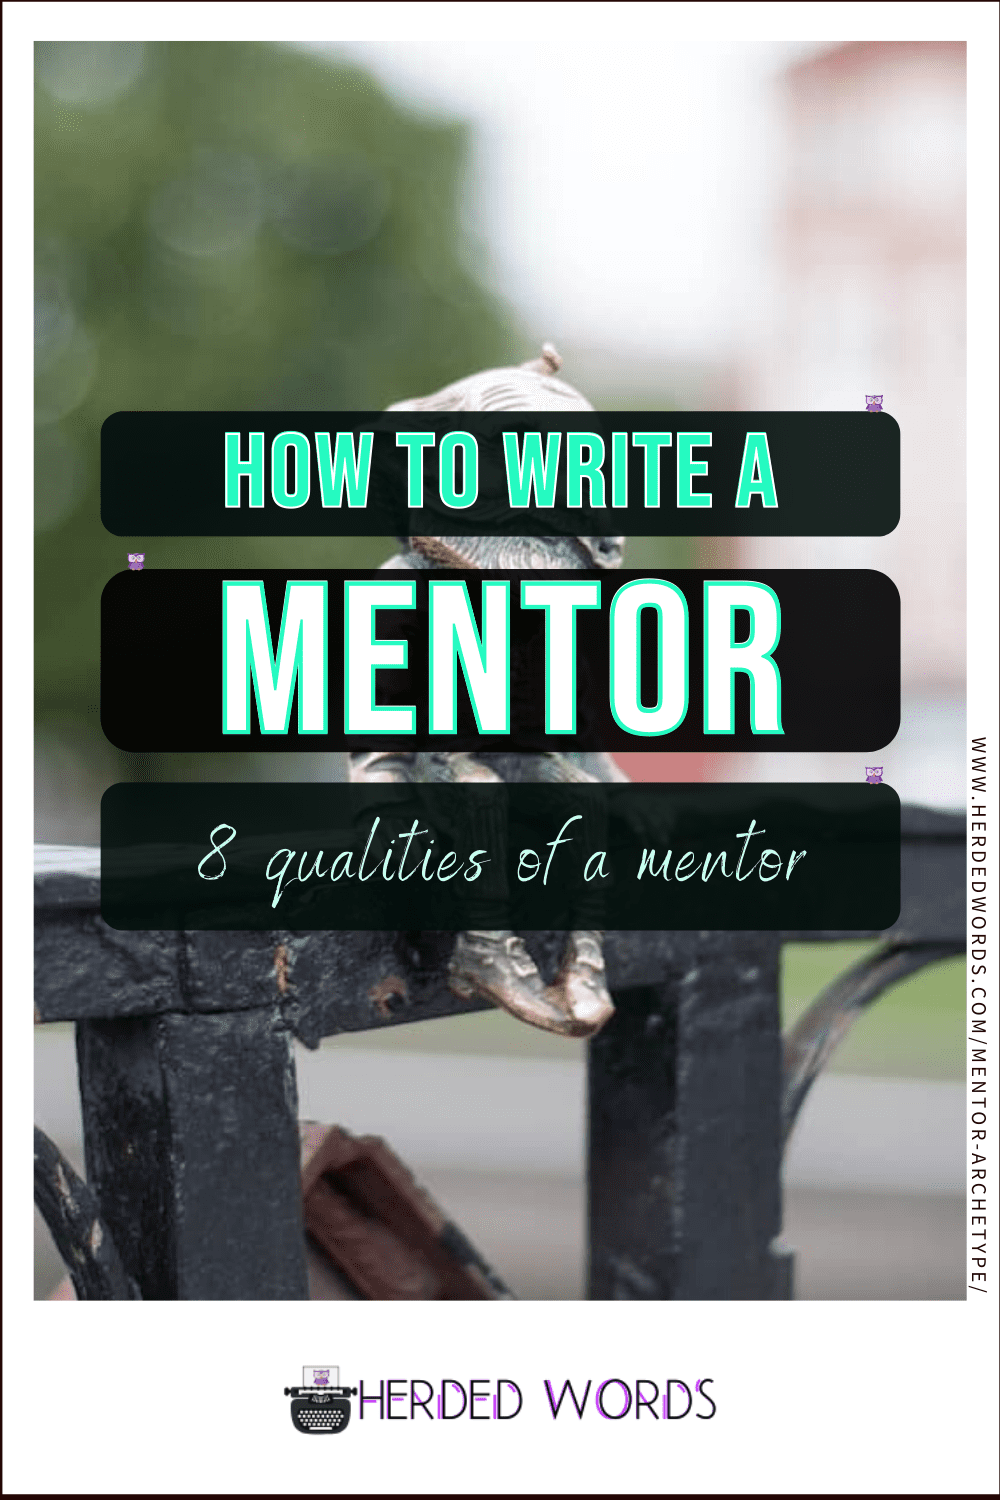 Image link to how to write a mentor (3 qualities)